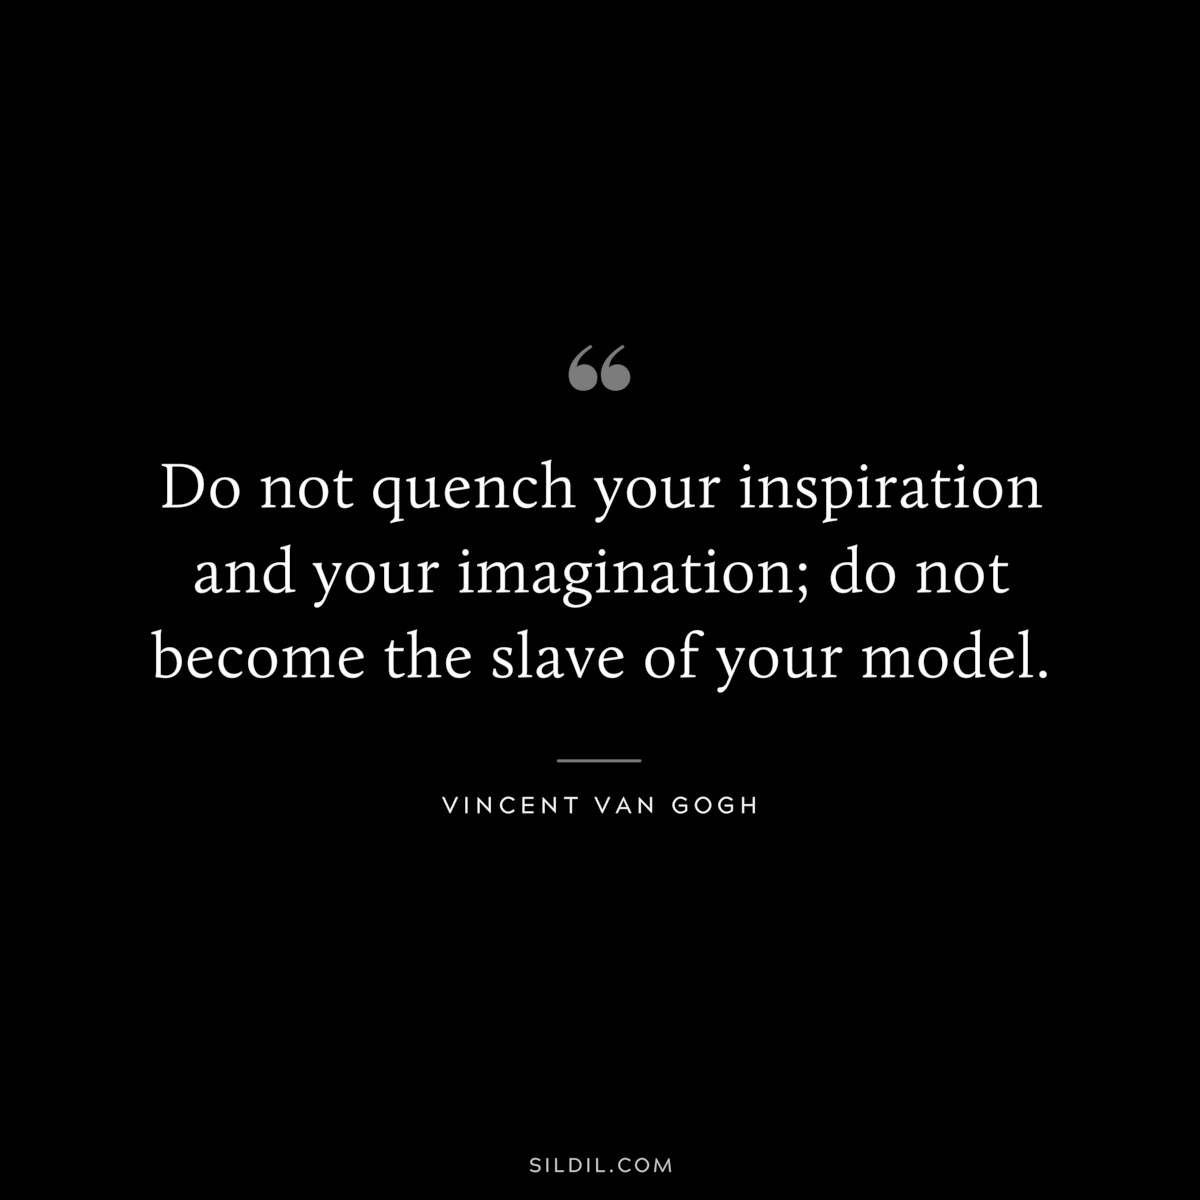 Do not quench your inspiration and your imagination; do not become the slave of your model. ― Vincent van Gogh